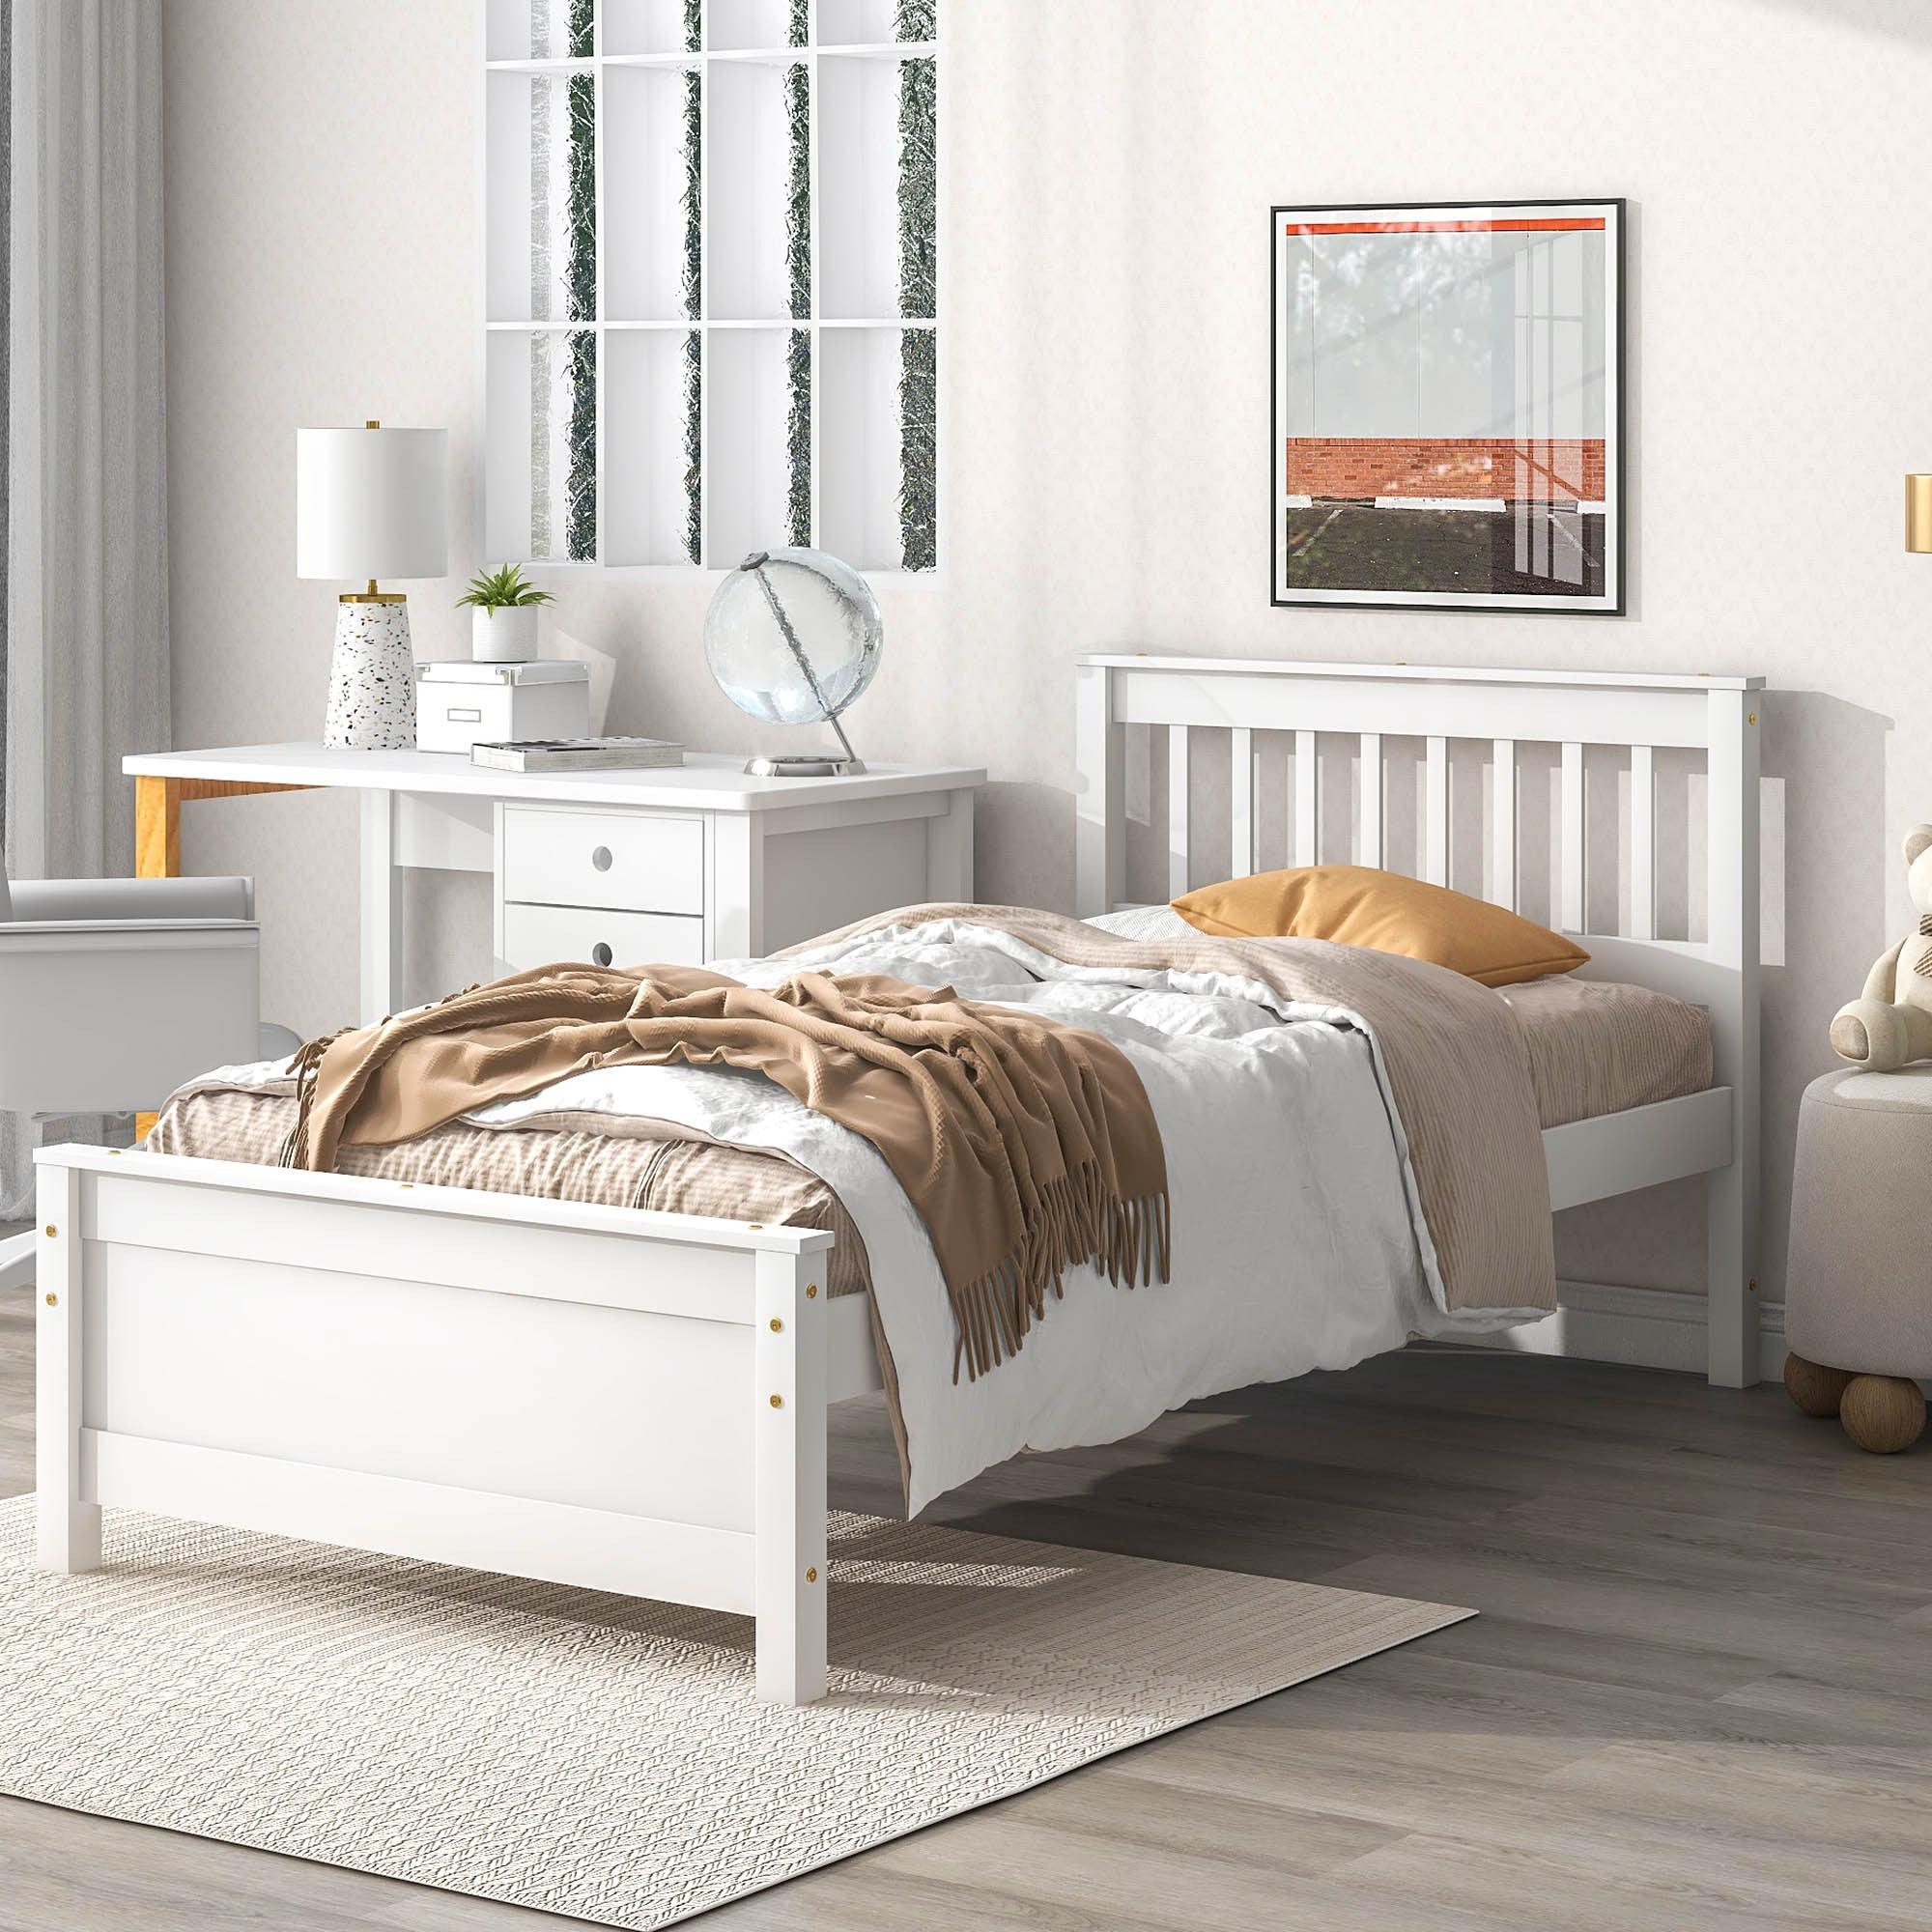 🆓🚛 Twin Bed With Headboard & Footboard for Kids, Teens & Adults With a Nightstand, White